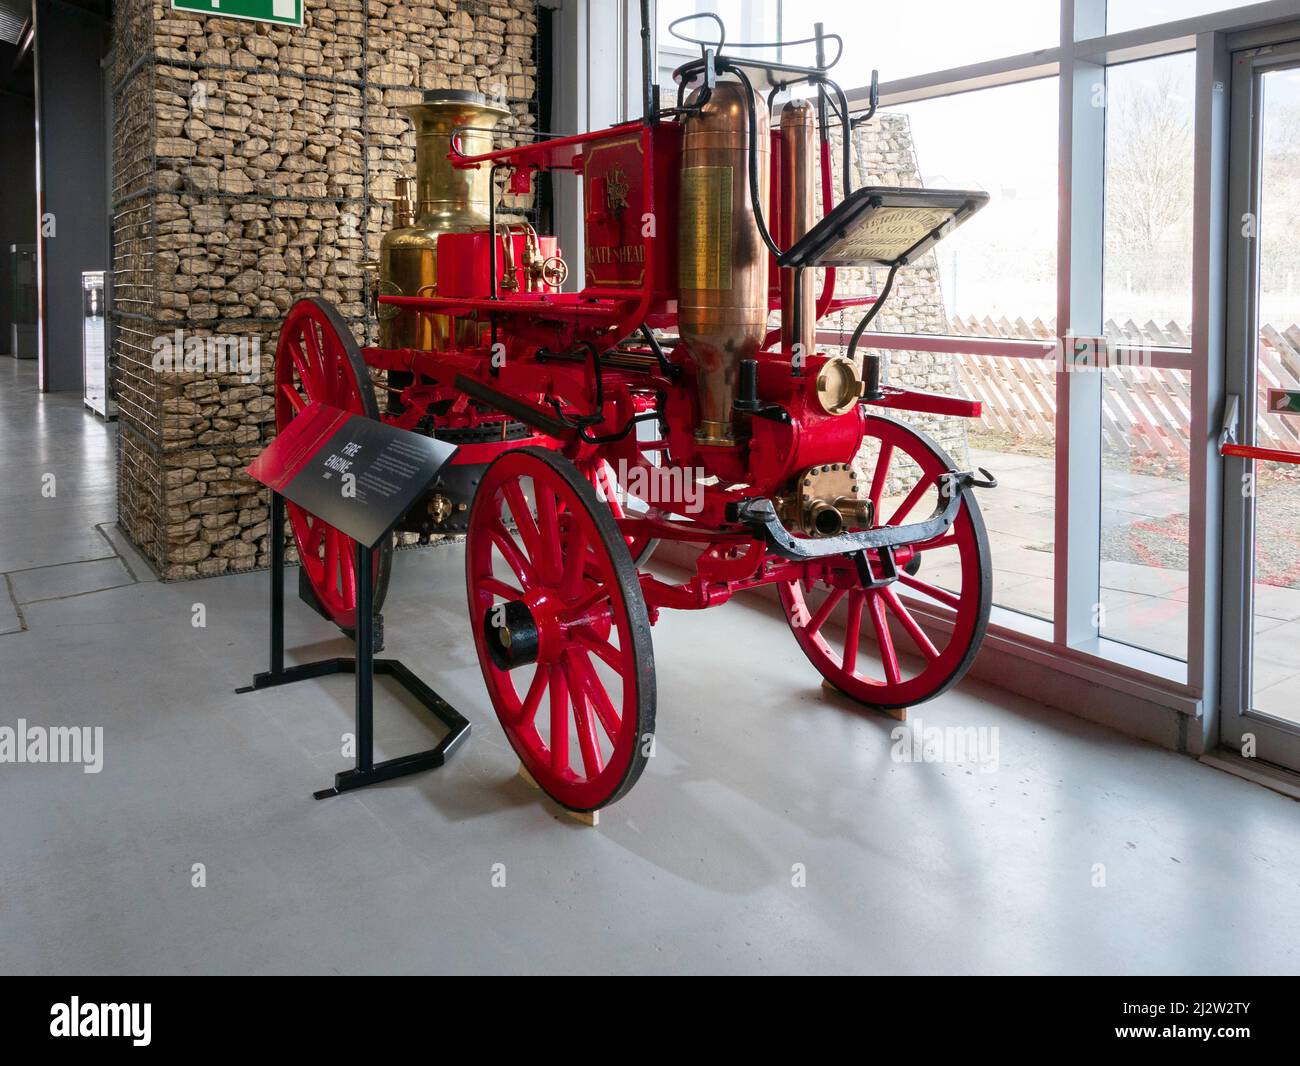 A horse drawn Fire engine for extinguishing fires built by Merryweather in 1880 for Gateshead council displayed at NRM Shildon Stock Photo